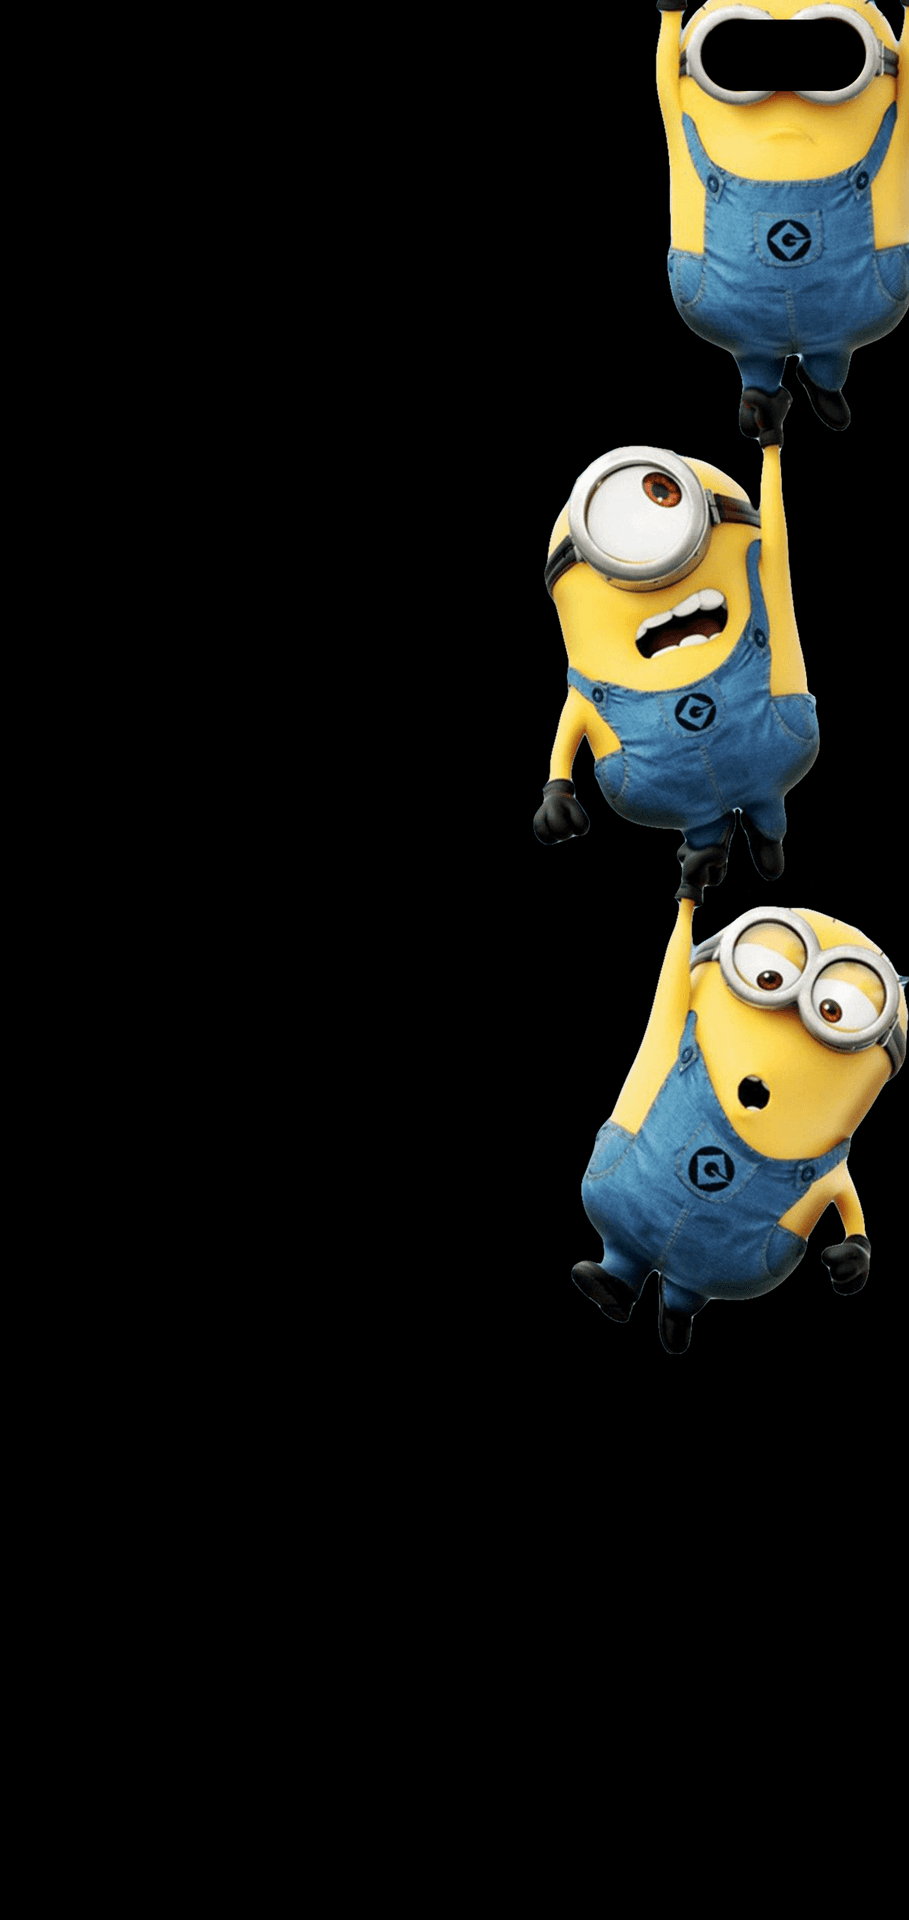 Download Cheerful Minions Ready For Adventure | Wallpapers.com